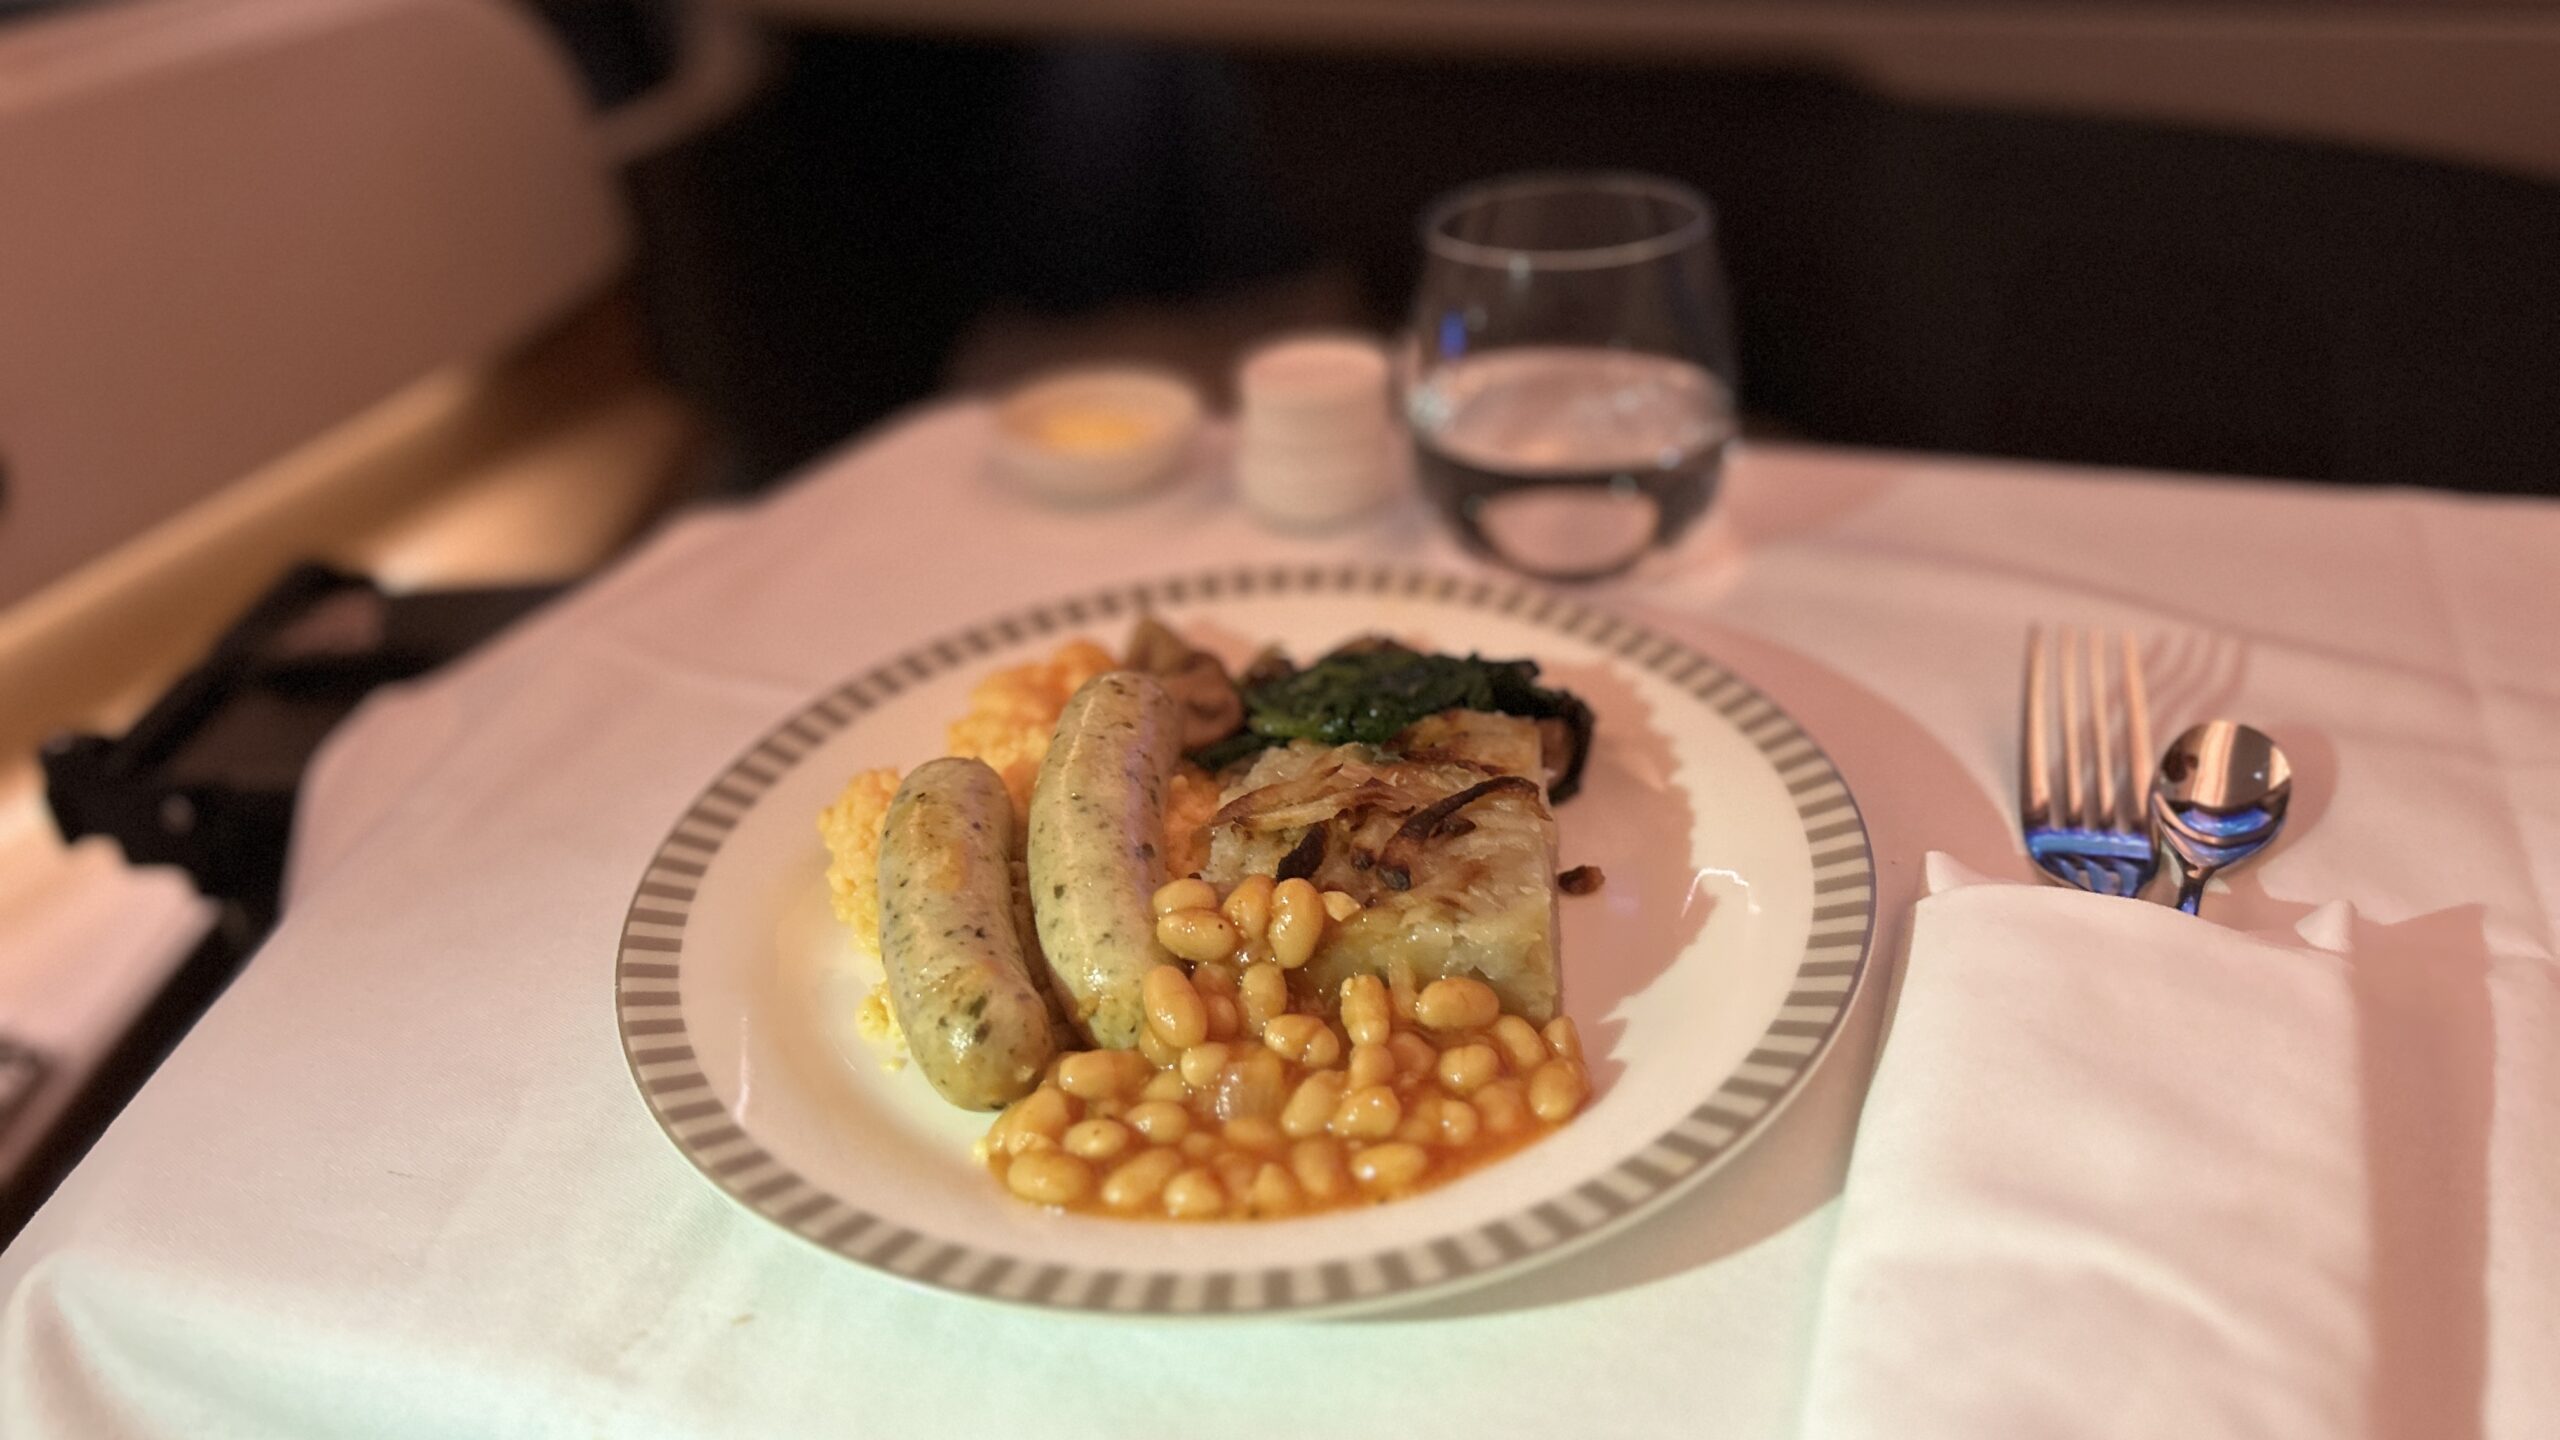 Singapore Airlines A350 Business Class Singapore to Brussels Hot Breakfast Point Hacks by Daniel Sciberras